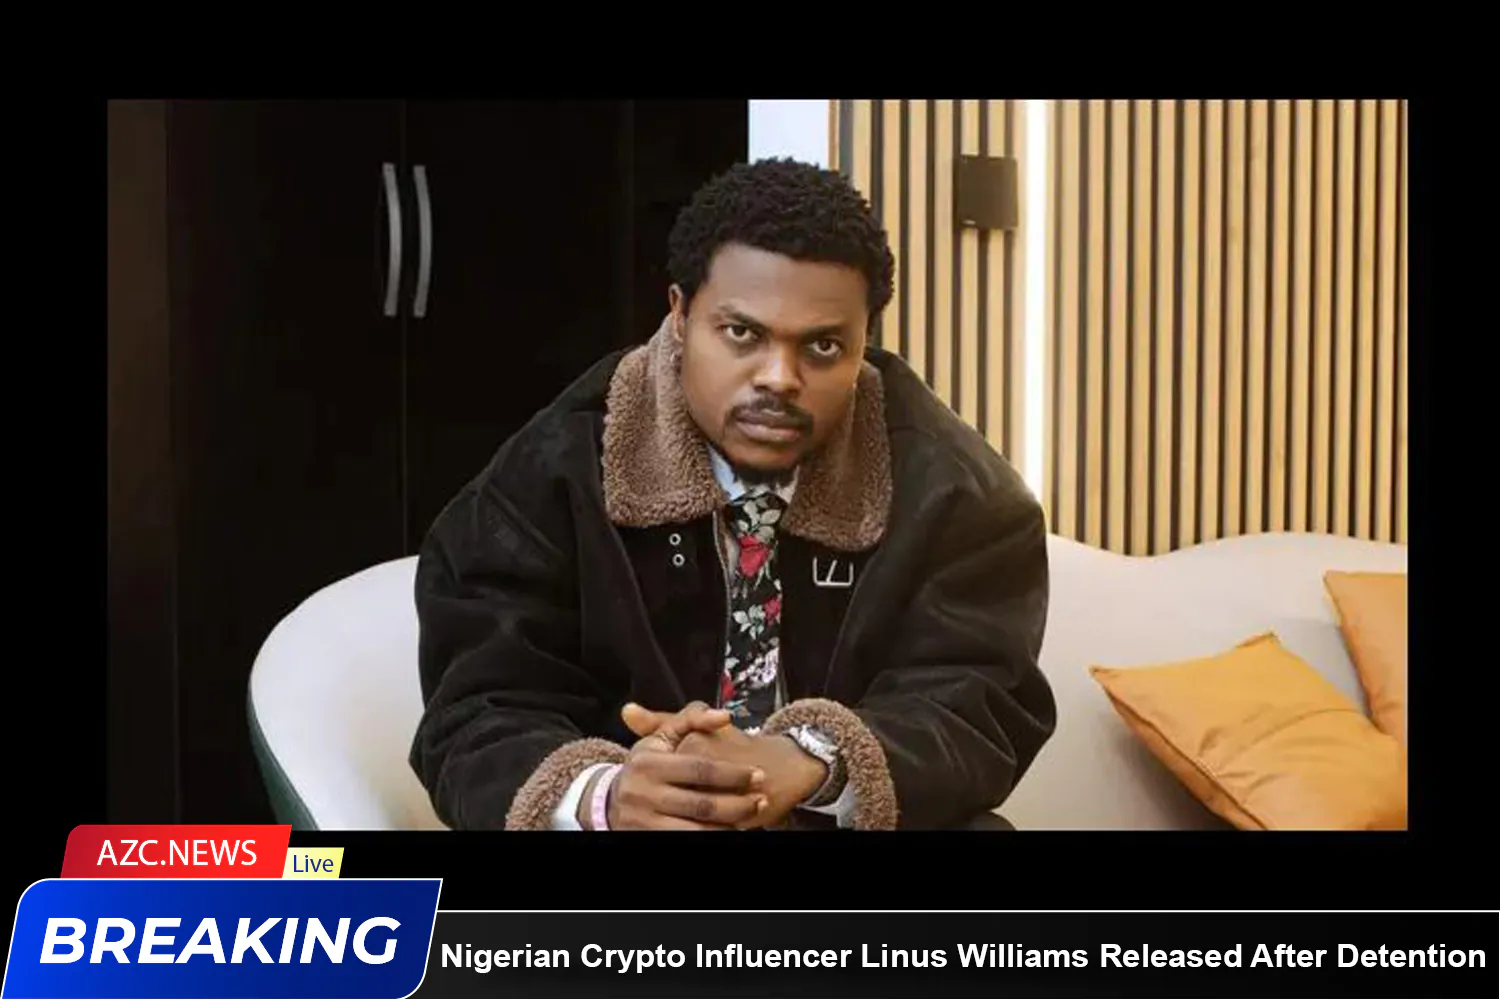 Nigerian Crypto Influencer Linus Williams Released After Detention